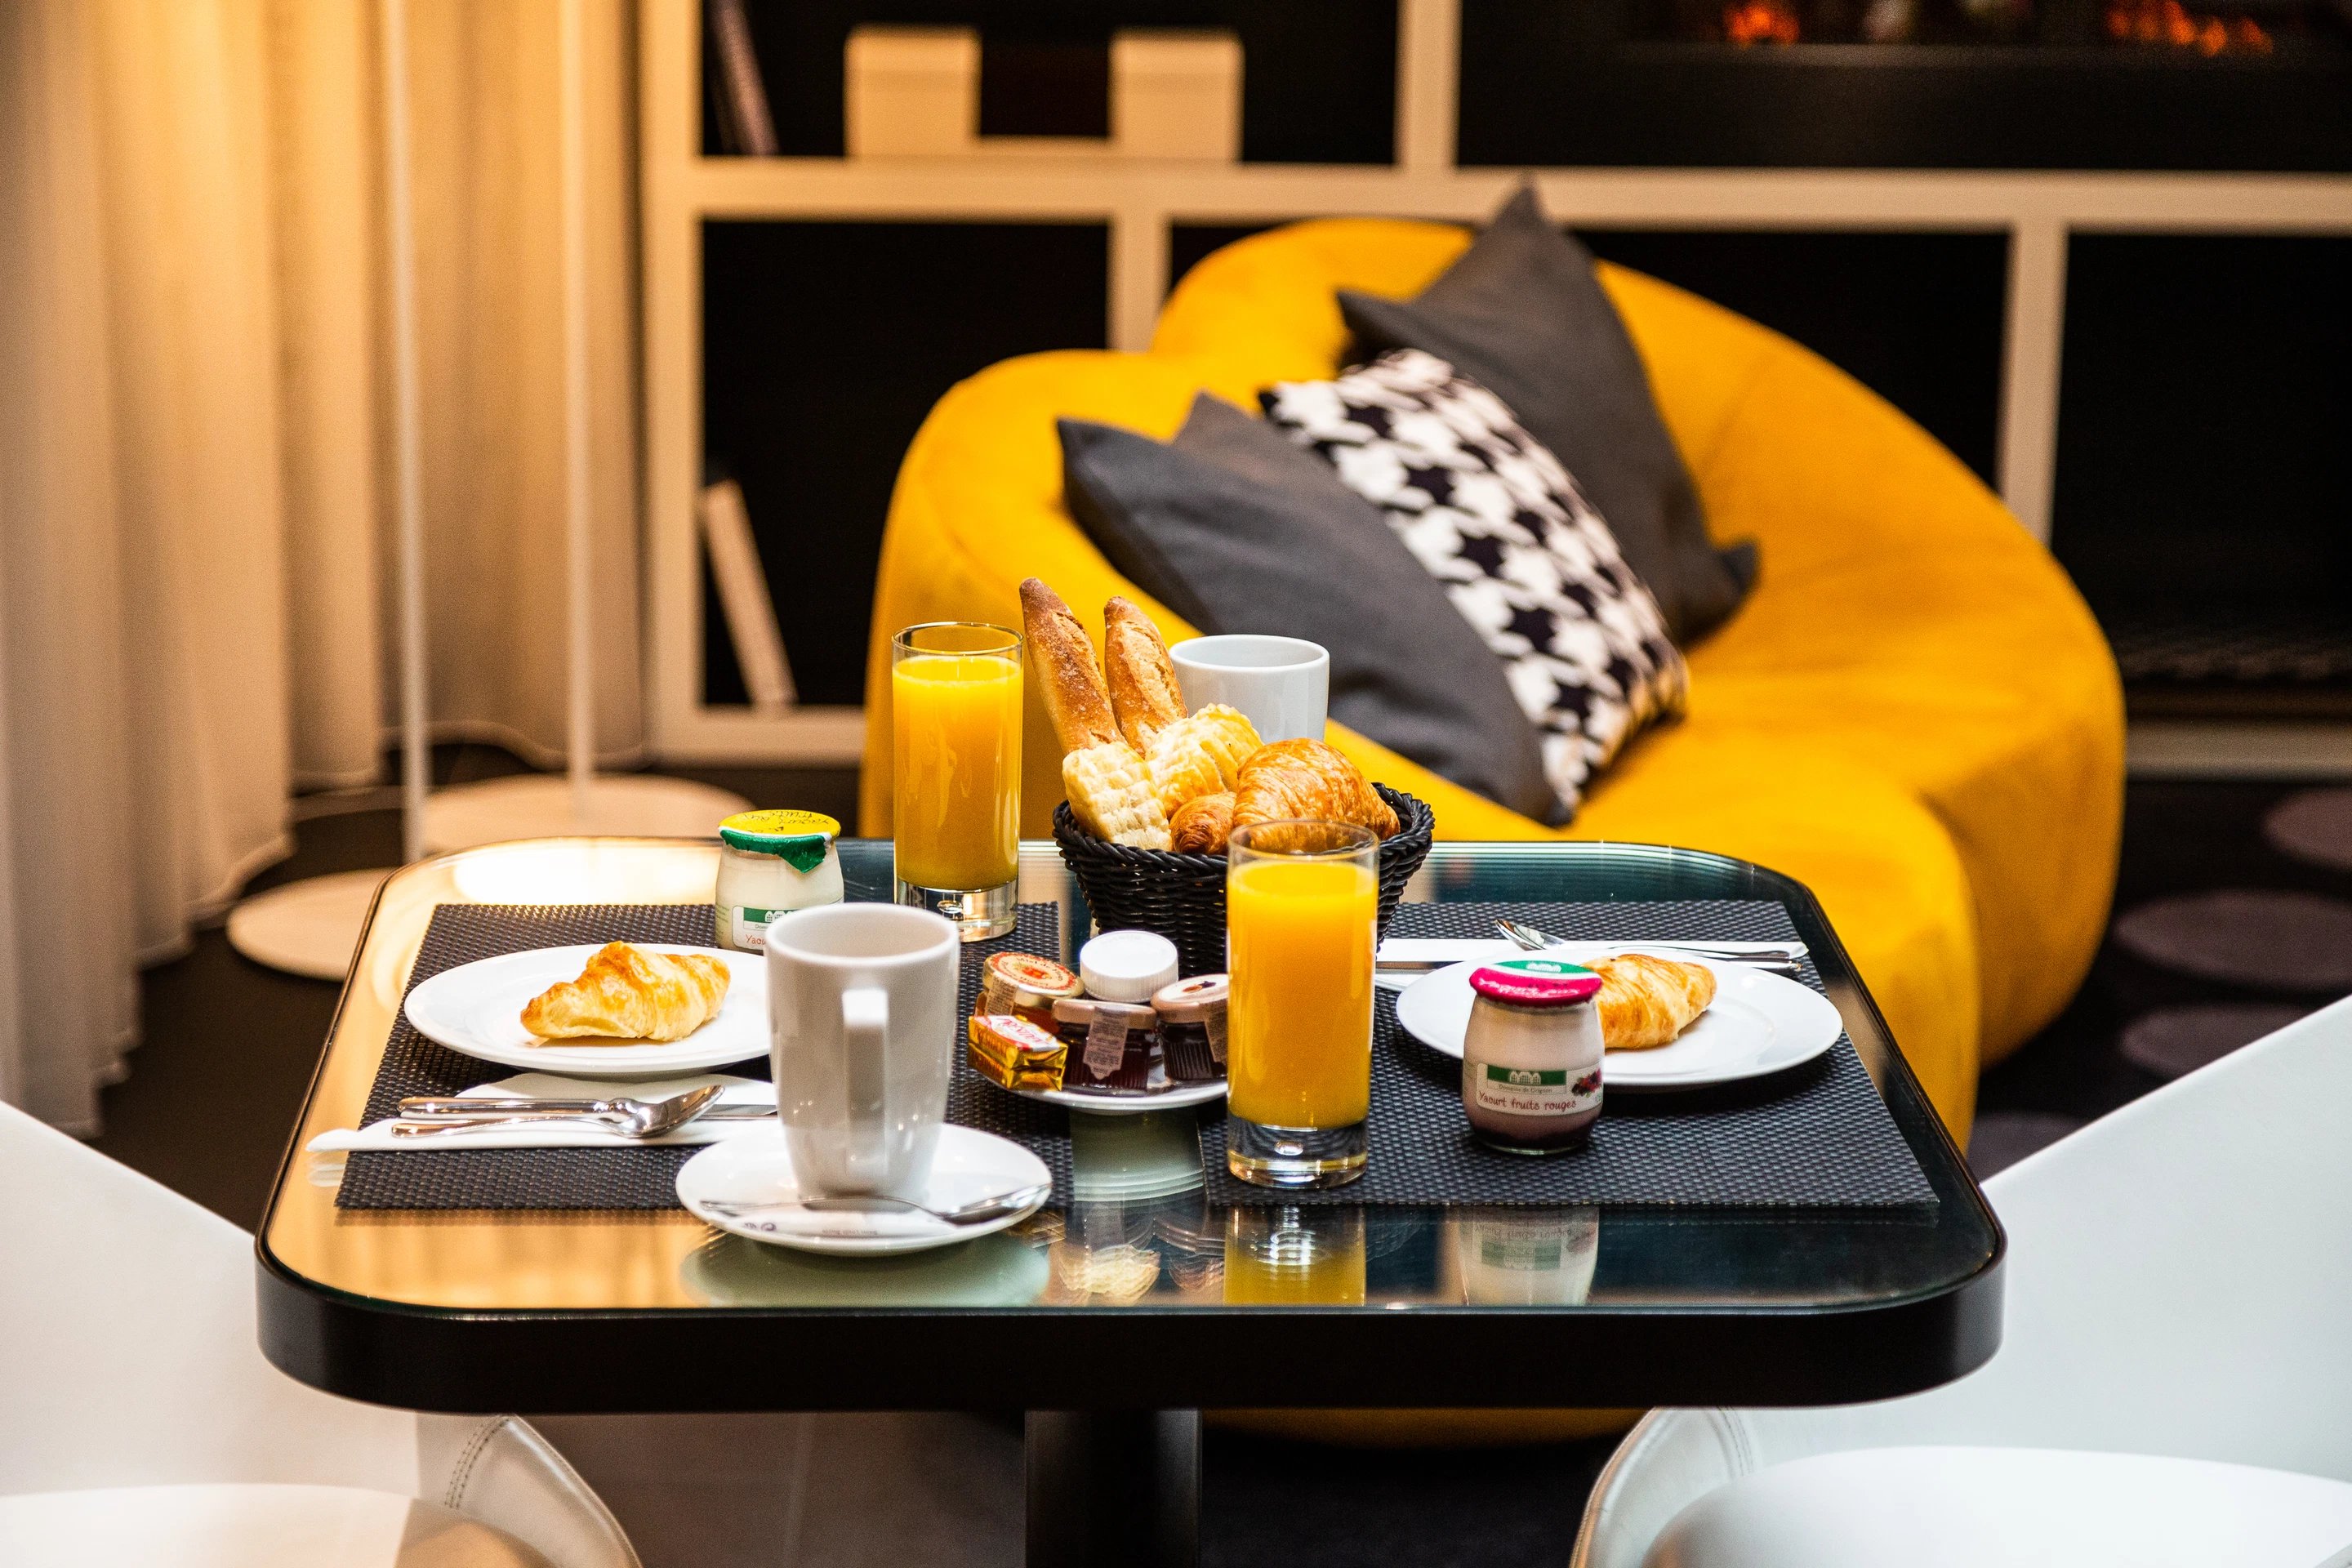 Accommodation for the 2024 Olympics: top-of-the-range breakfast